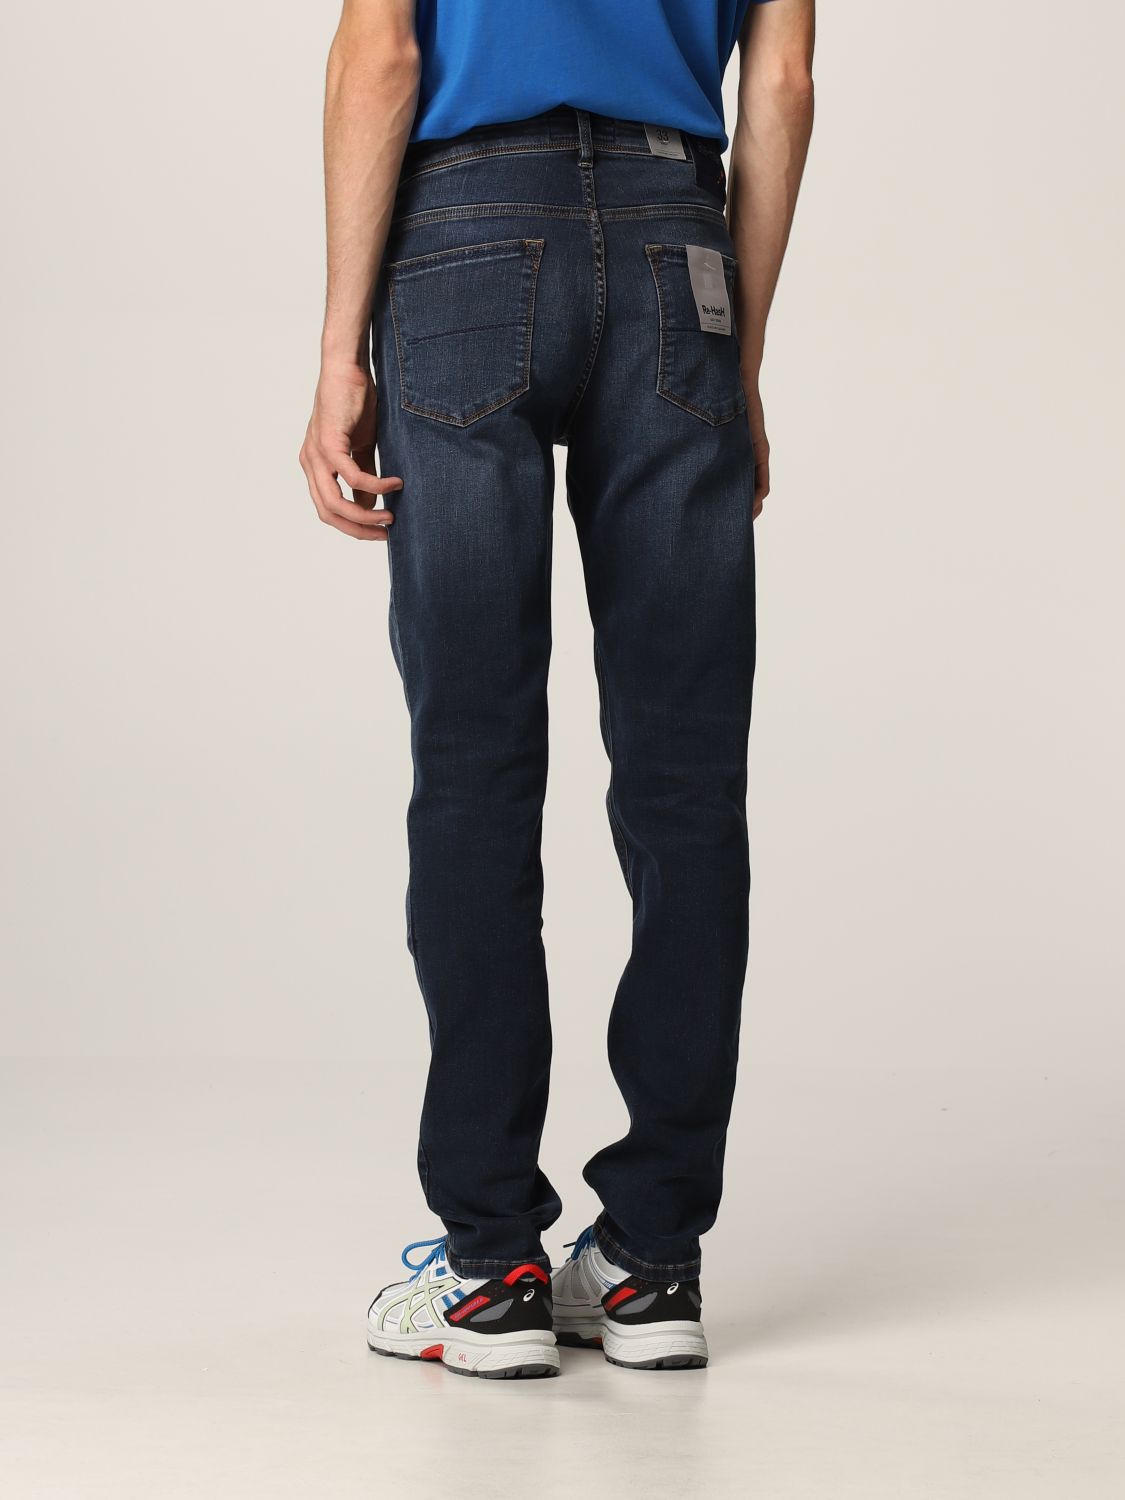 Jeans Re-Hash: Jeans hombre Re-hash stone washed 2